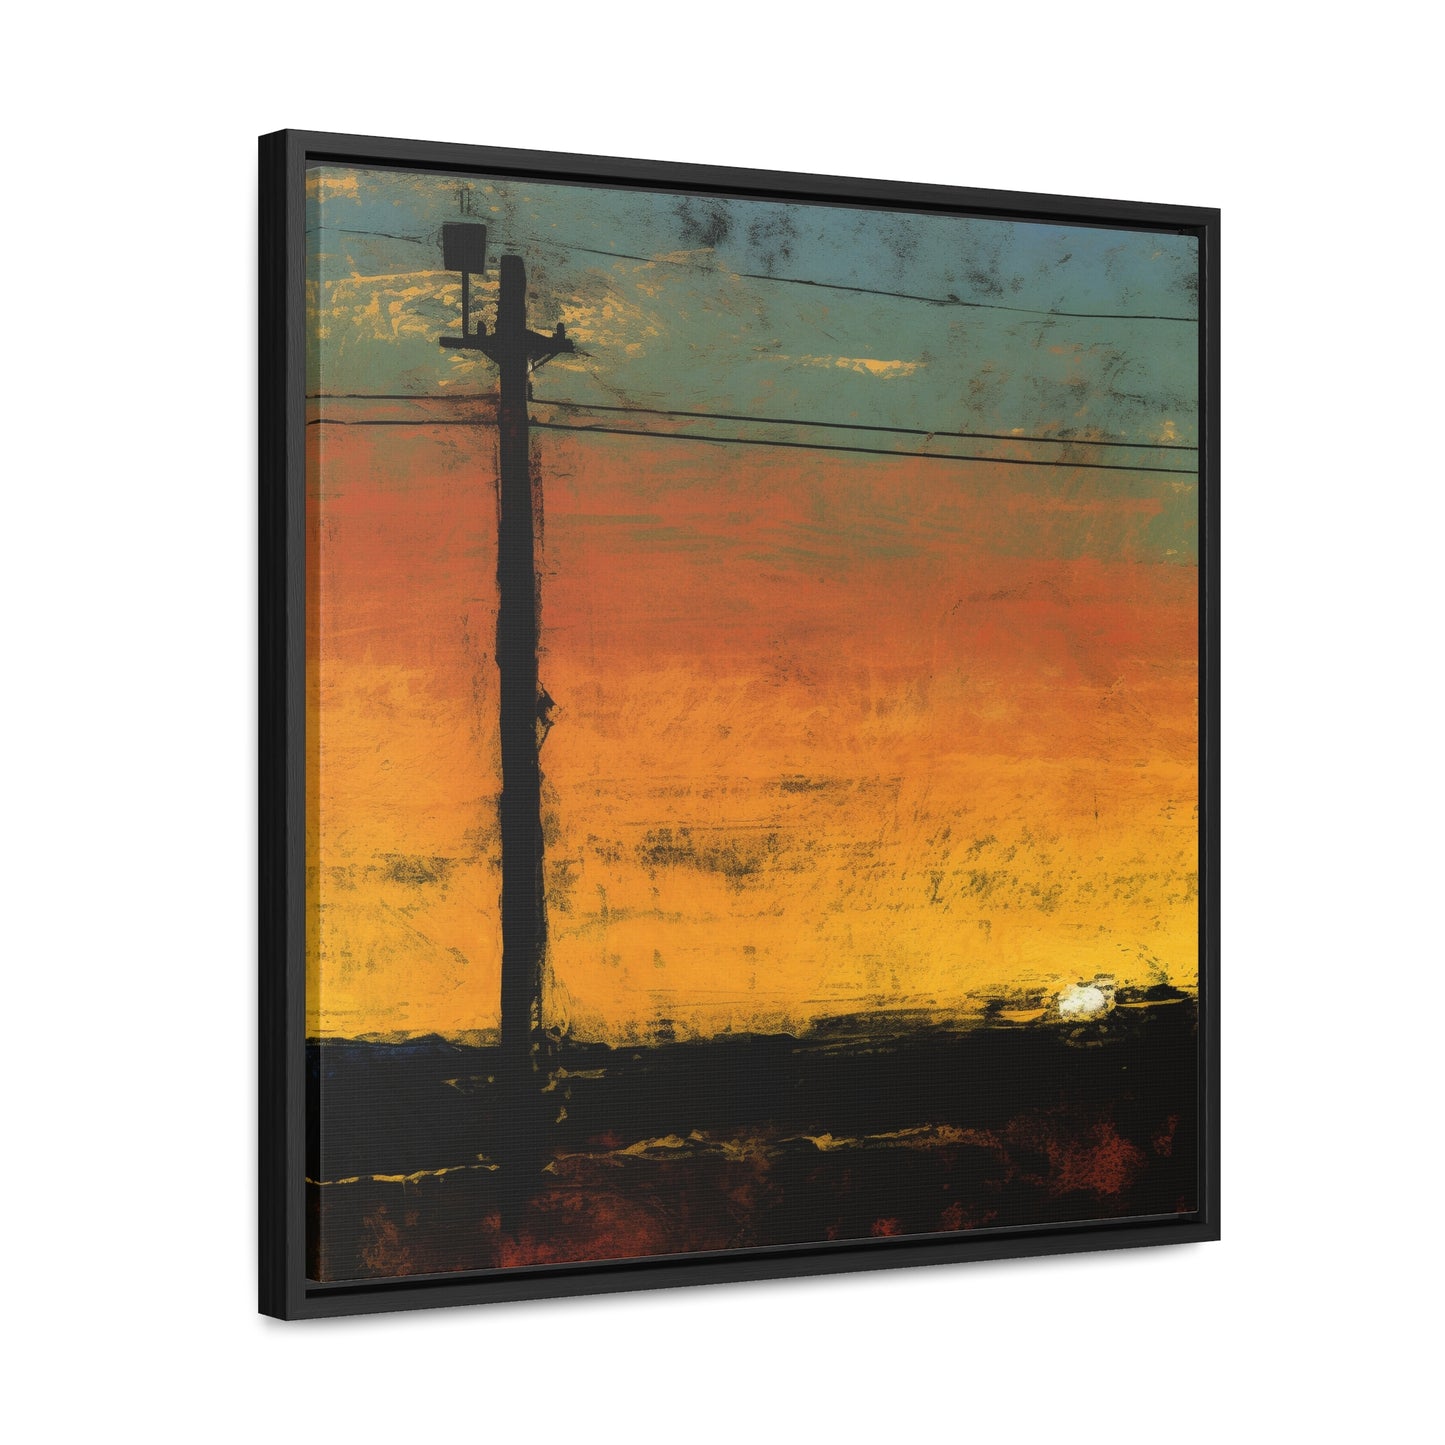 Land of the Sun 82, Valentinii, Gallery Canvas Wraps, Square Frame